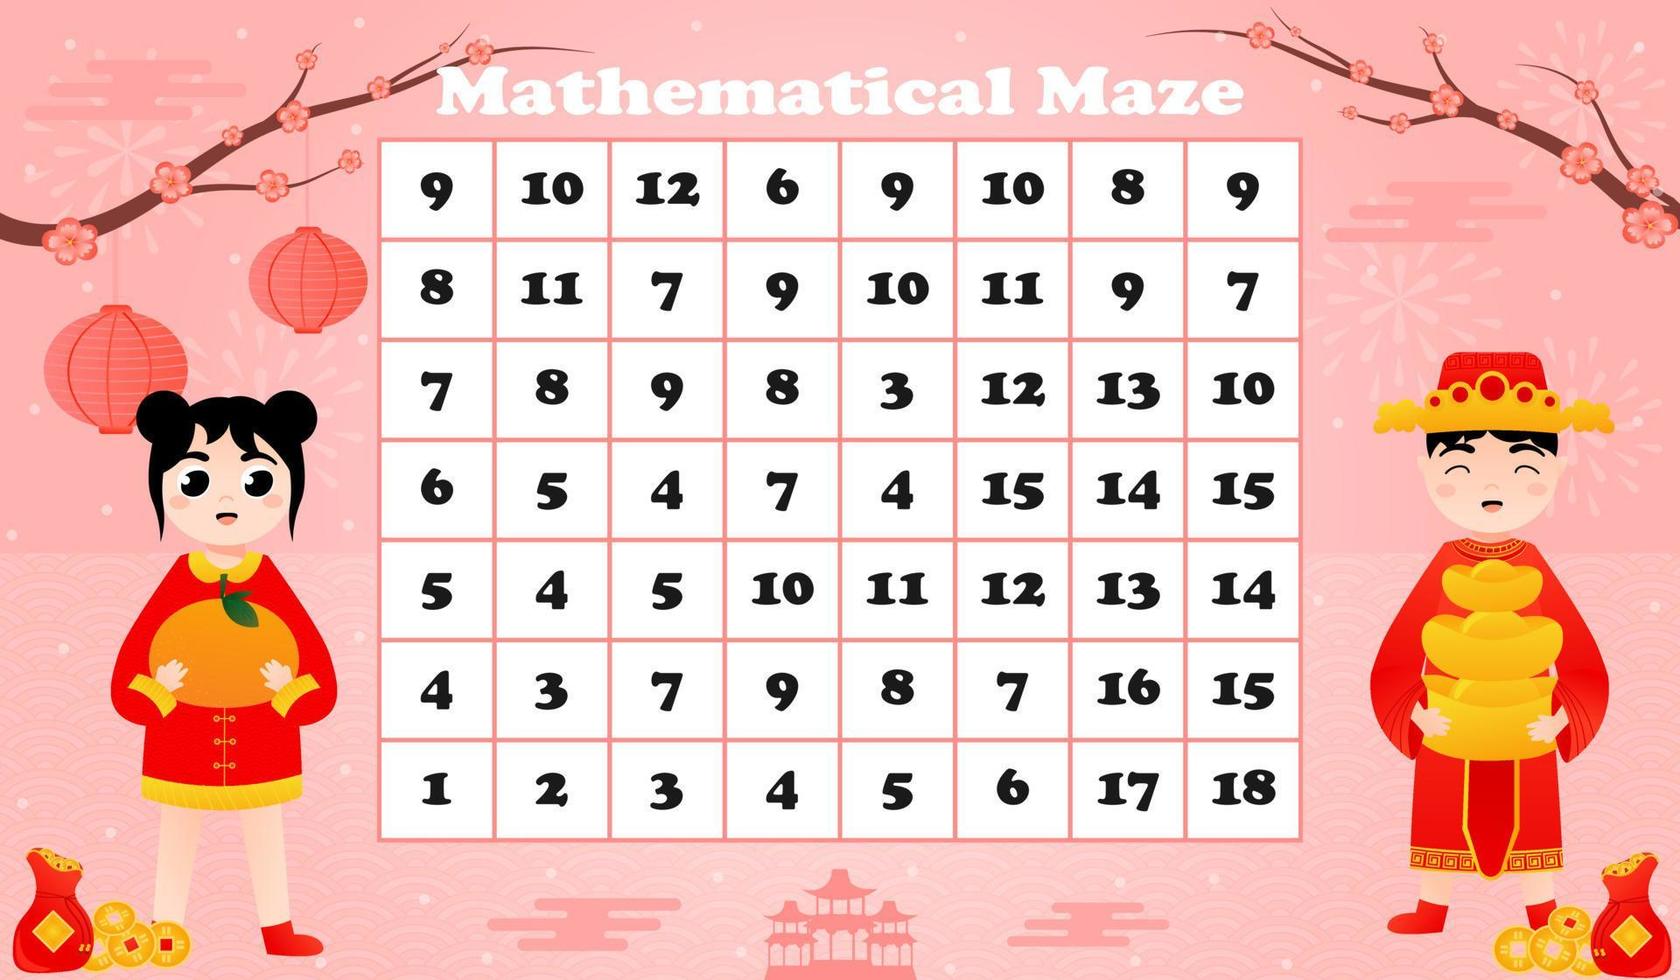 Mathmetical maze for kids with cute girl holding tangerine and boy holding ingots on pink background vector